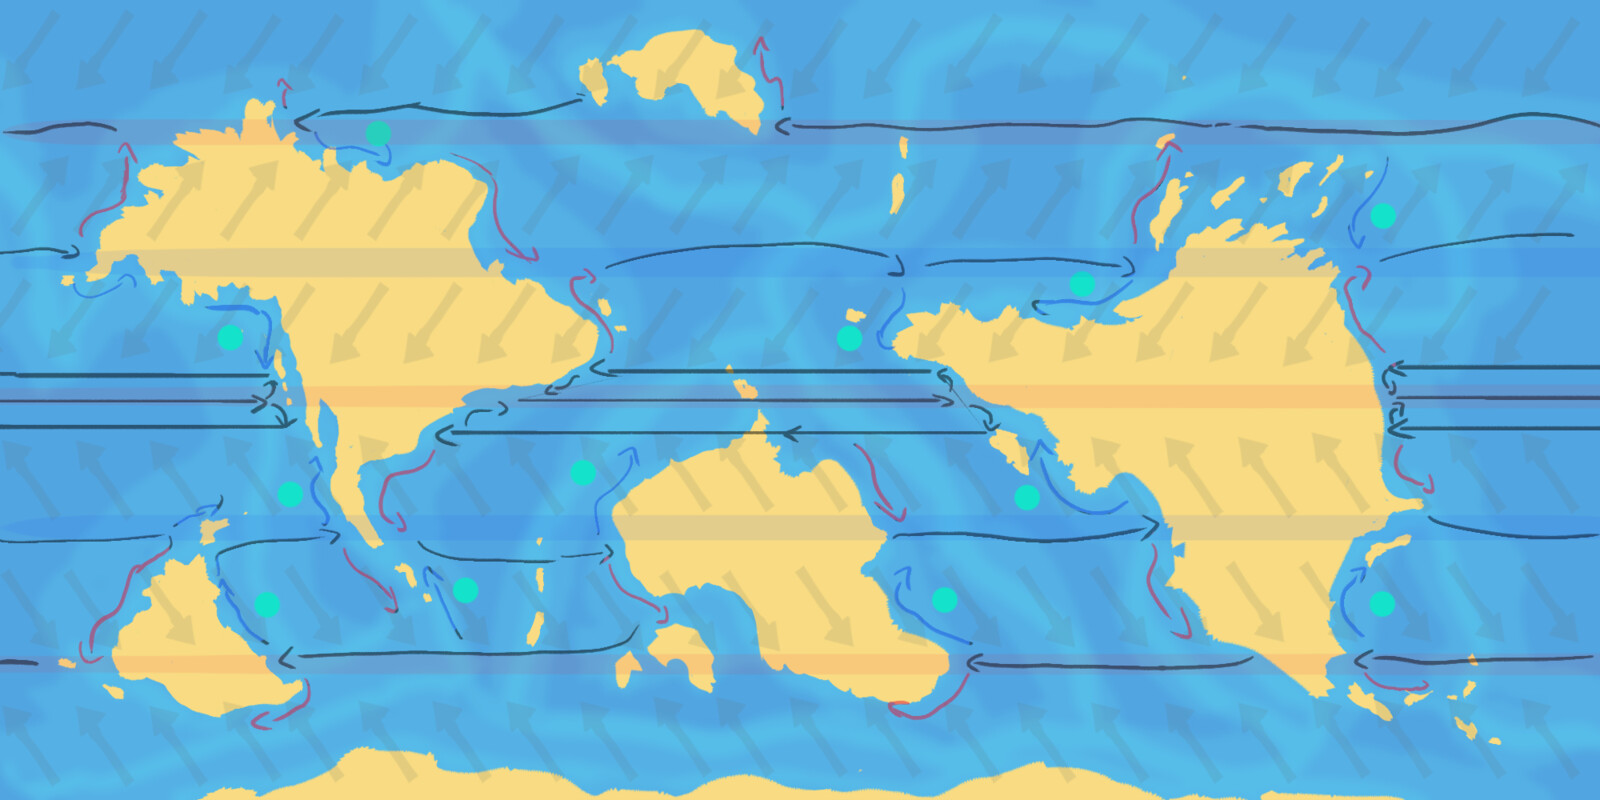 Ocean currents and wind directions.